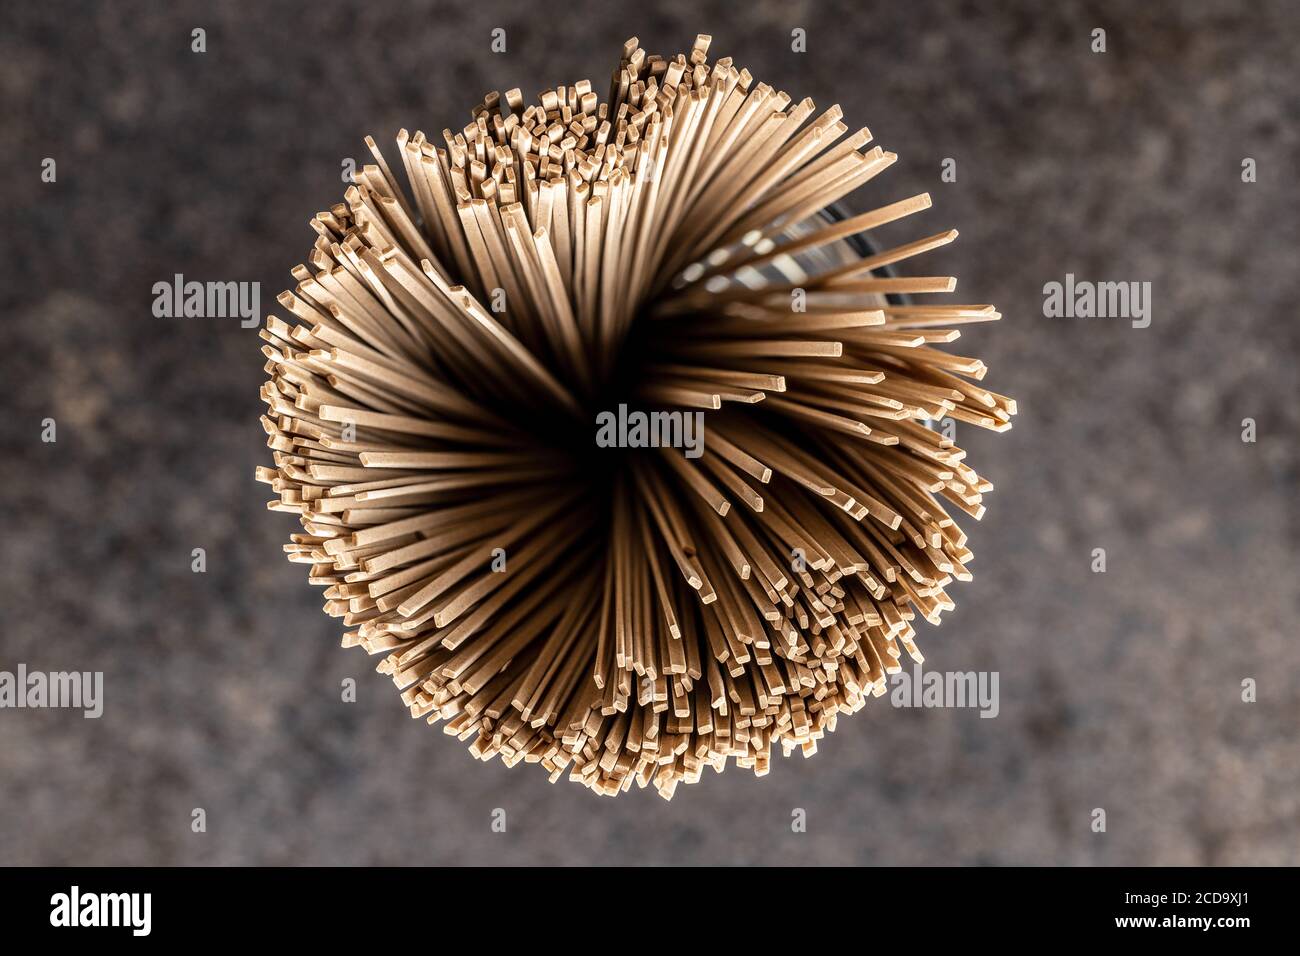 Uncooked soba noodles. Traditional Japanese noodles. Top view. Stock Photo